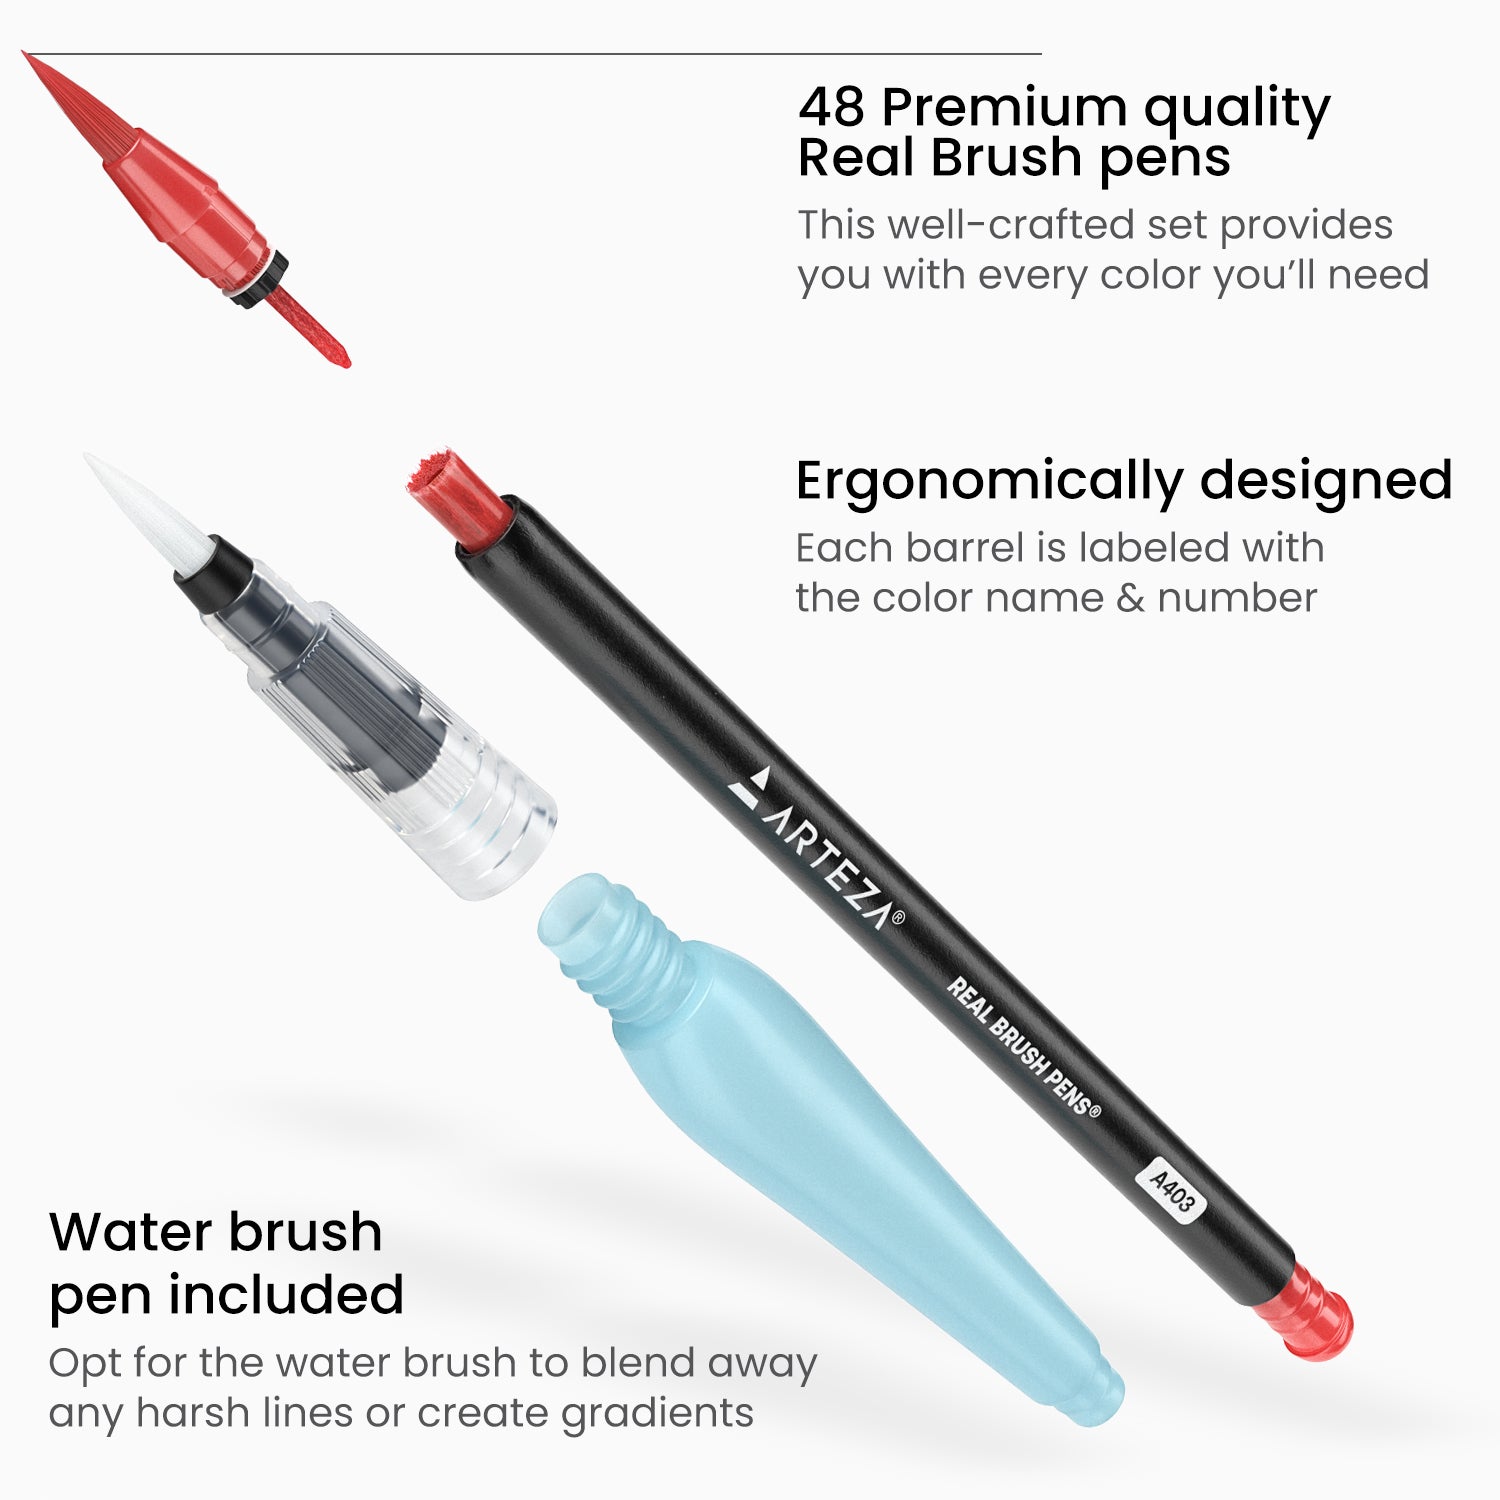 Blick: Your favorite brush markers are better than ever